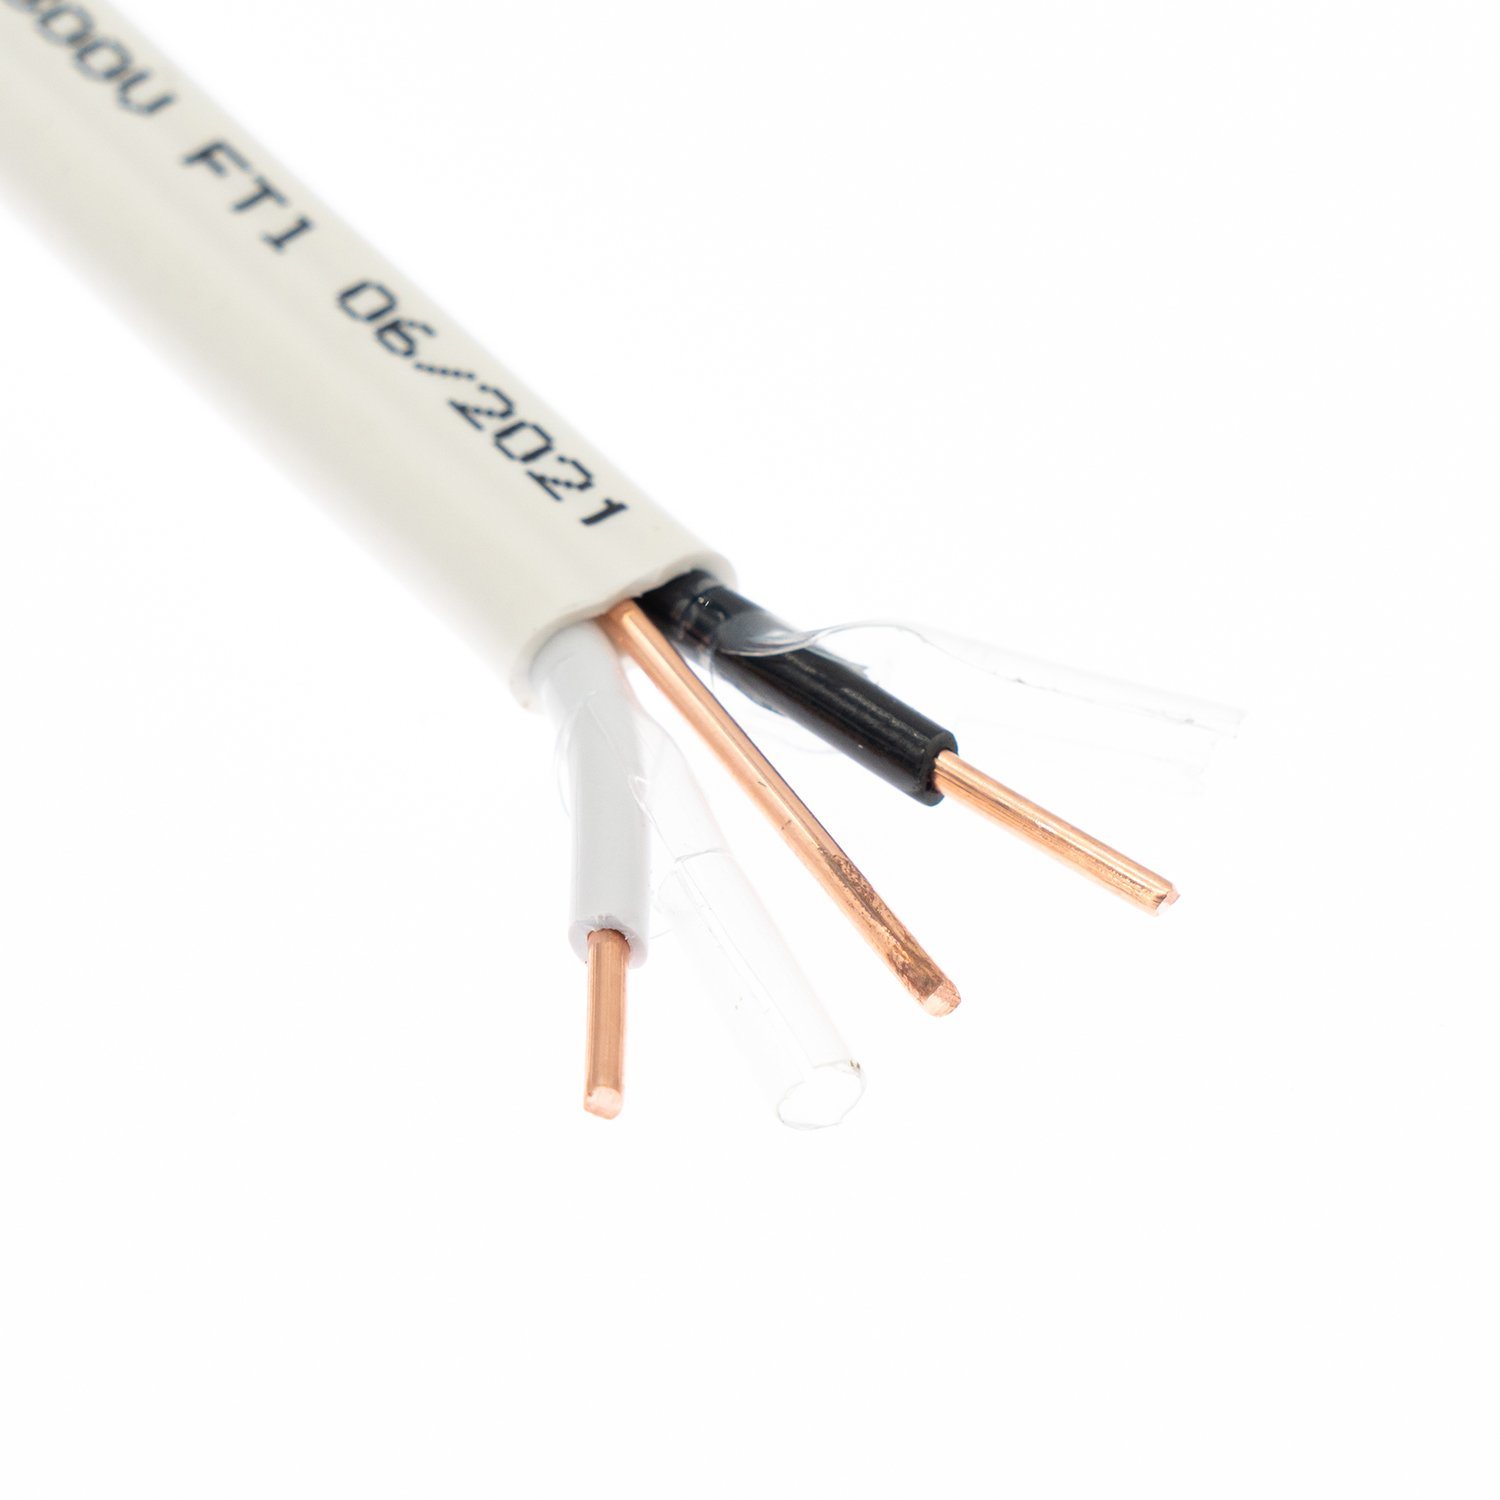 Nmd90 Copper Electrical Cable 10/3 Orange Color cUL Certificate